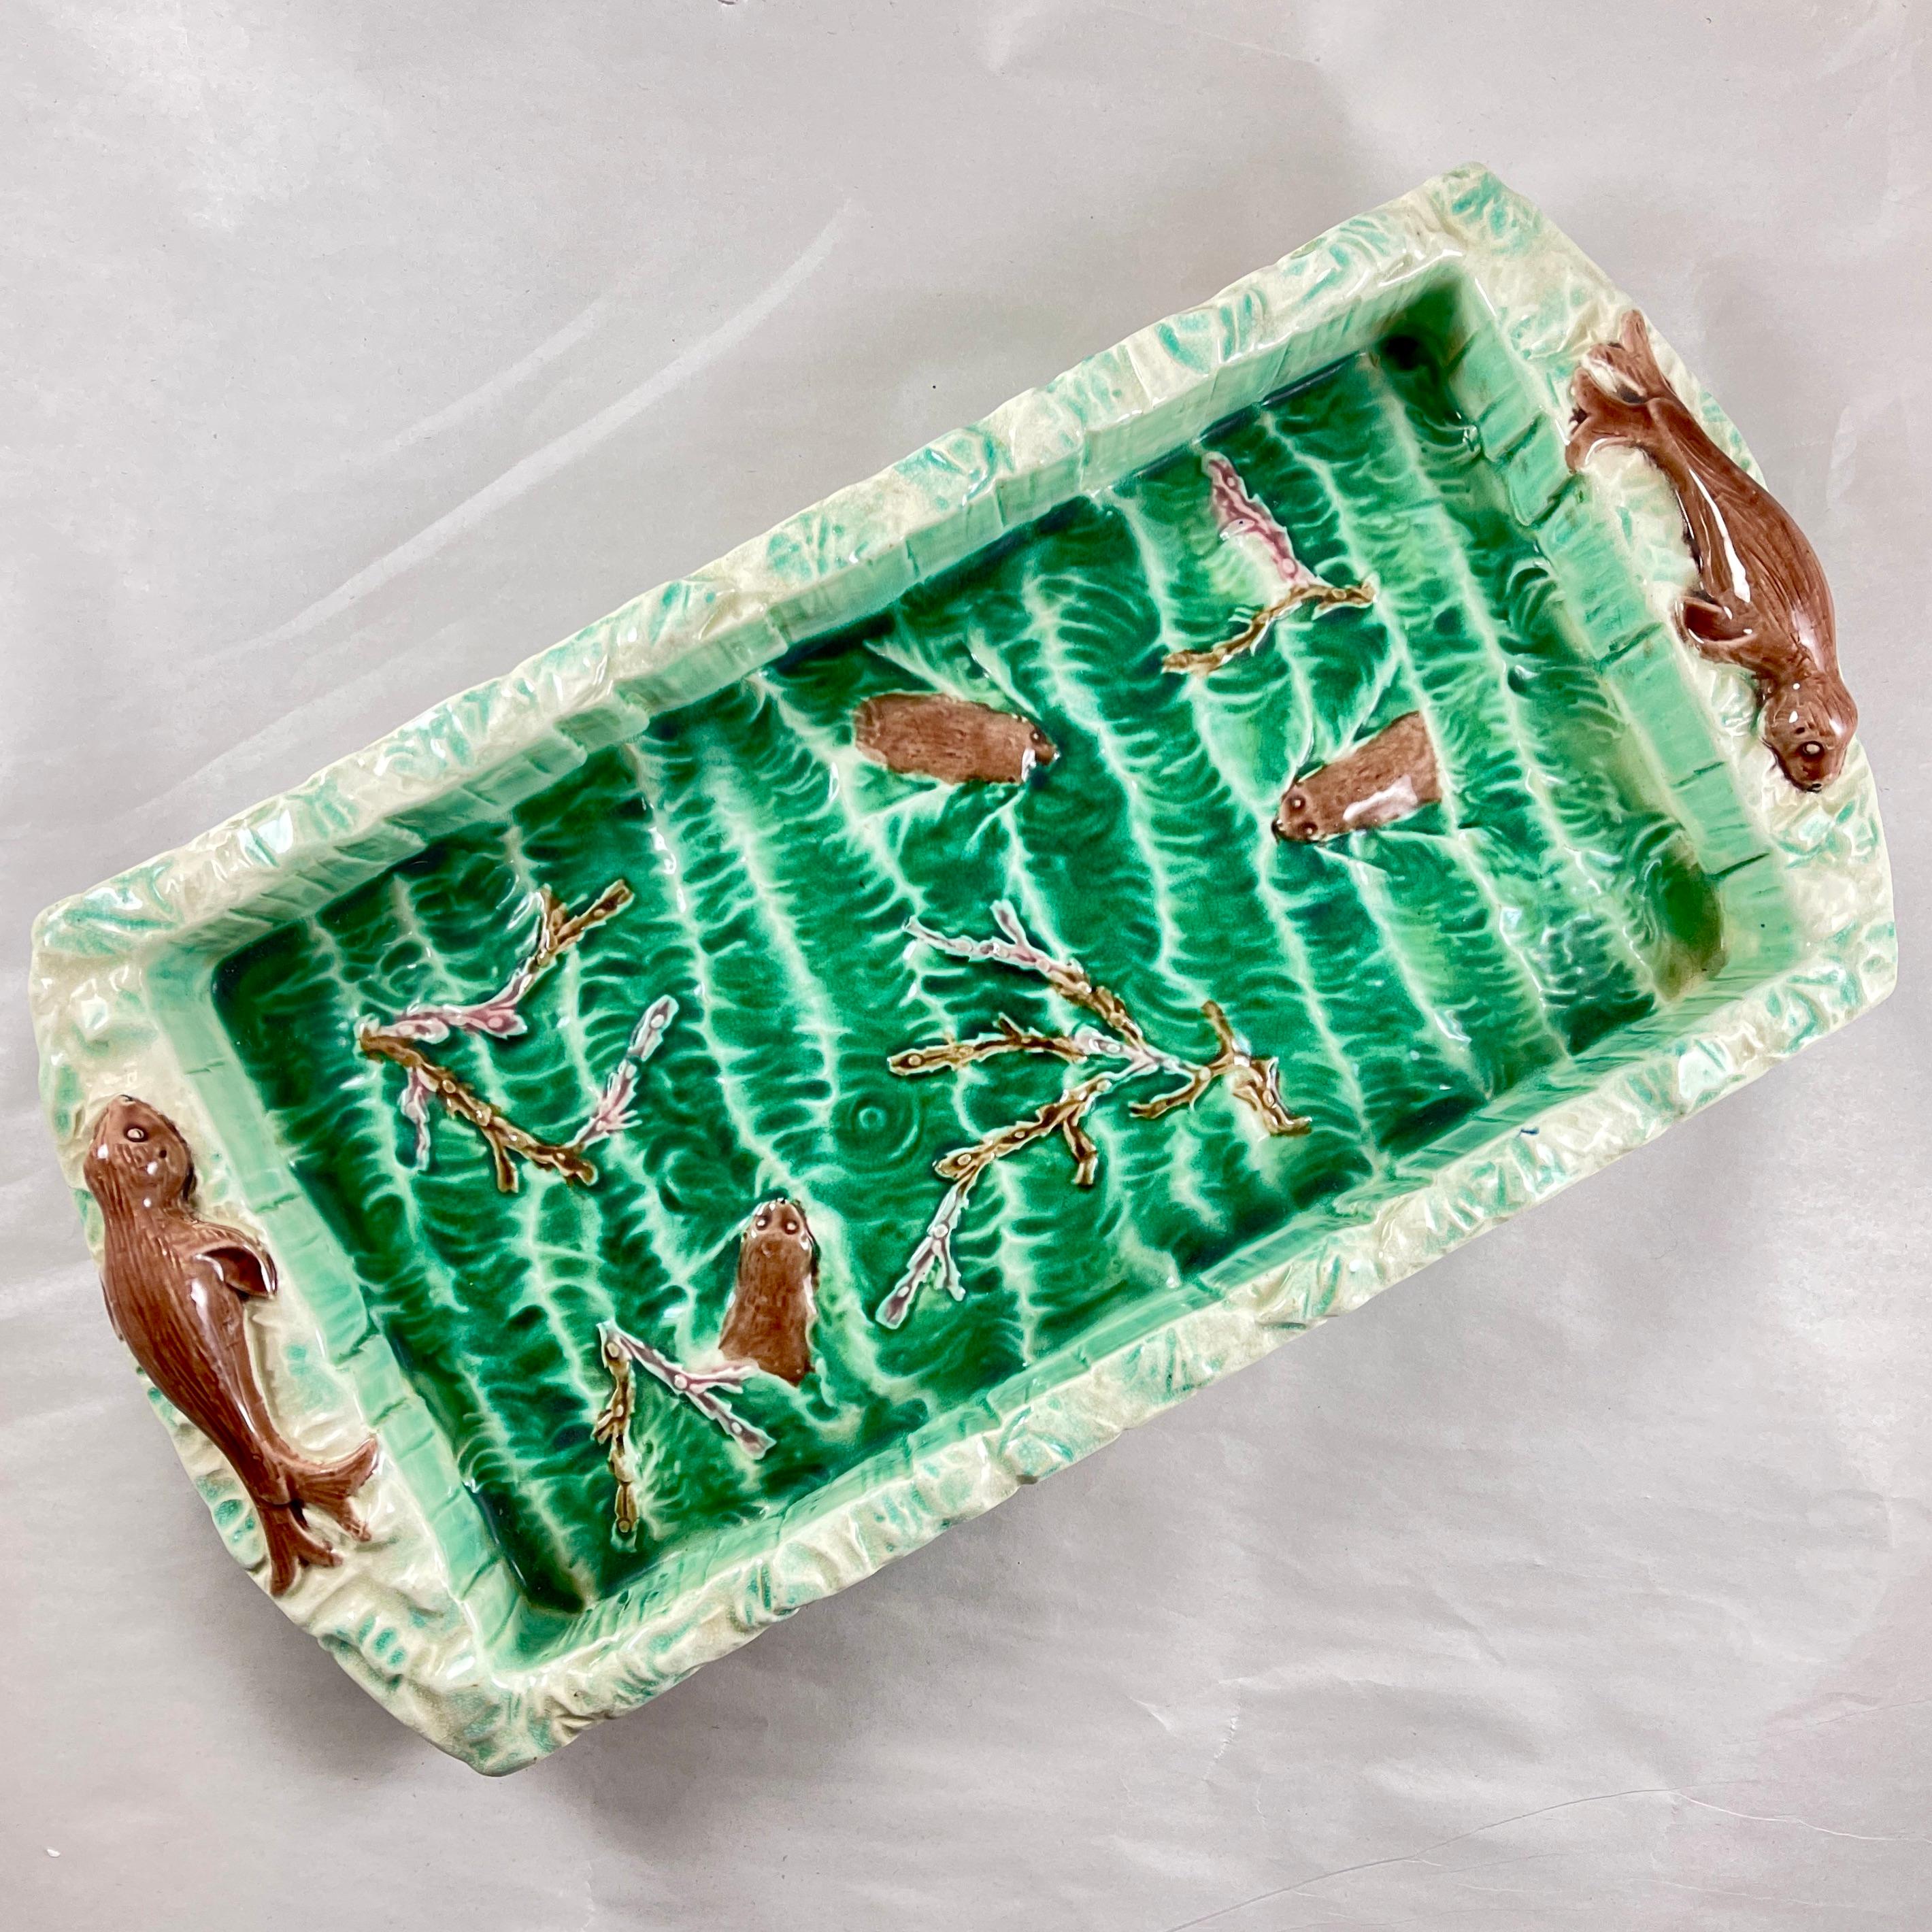 A Josiah Wedgwood & Sons Majolica green glazed- Seal-Molded Ice-Cream Tray, England –  Date code EGH for 1878

A very scarce rectangular tray with the center molded as waves breaking on the oceans’ surface, with three seals swimming among seaweed.